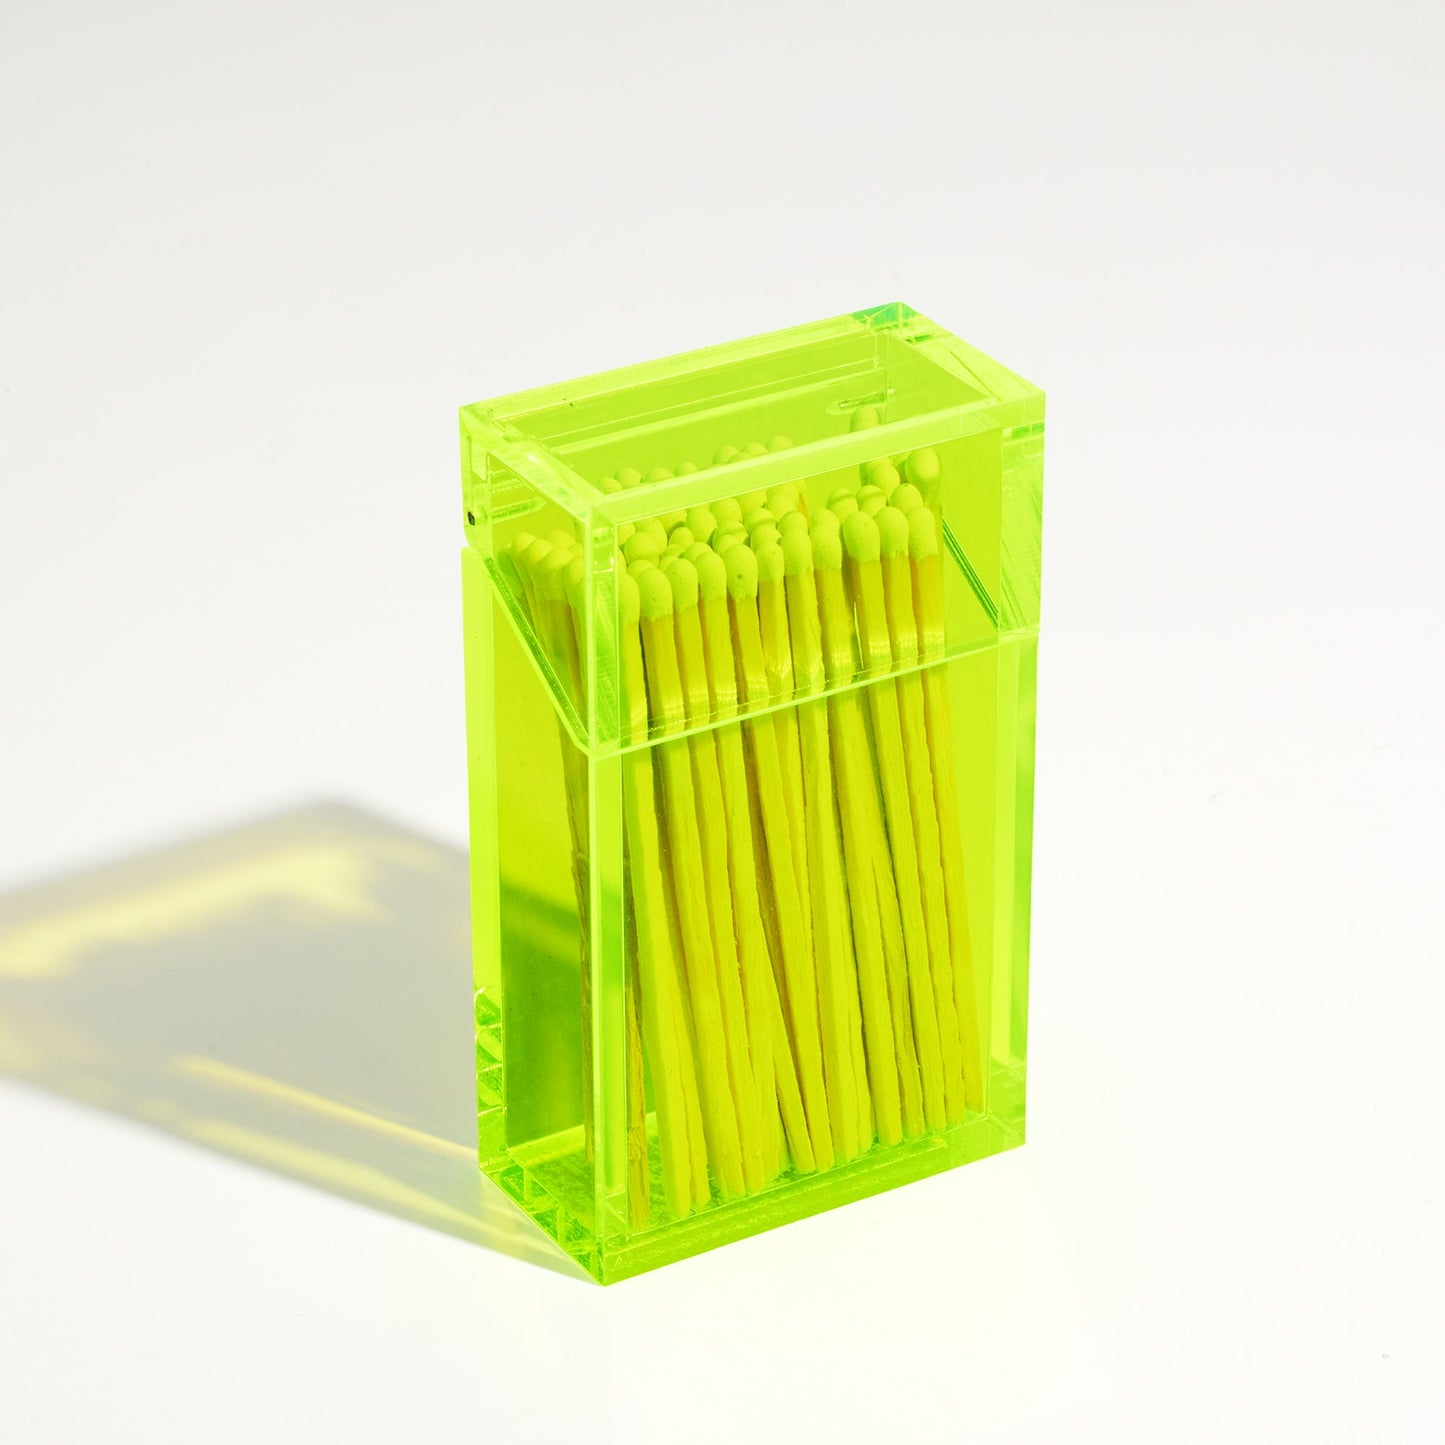 Closed Opened Match holder shaped like a Cigarette Case. Made with neon green acrylic. Case holds White matches in it.